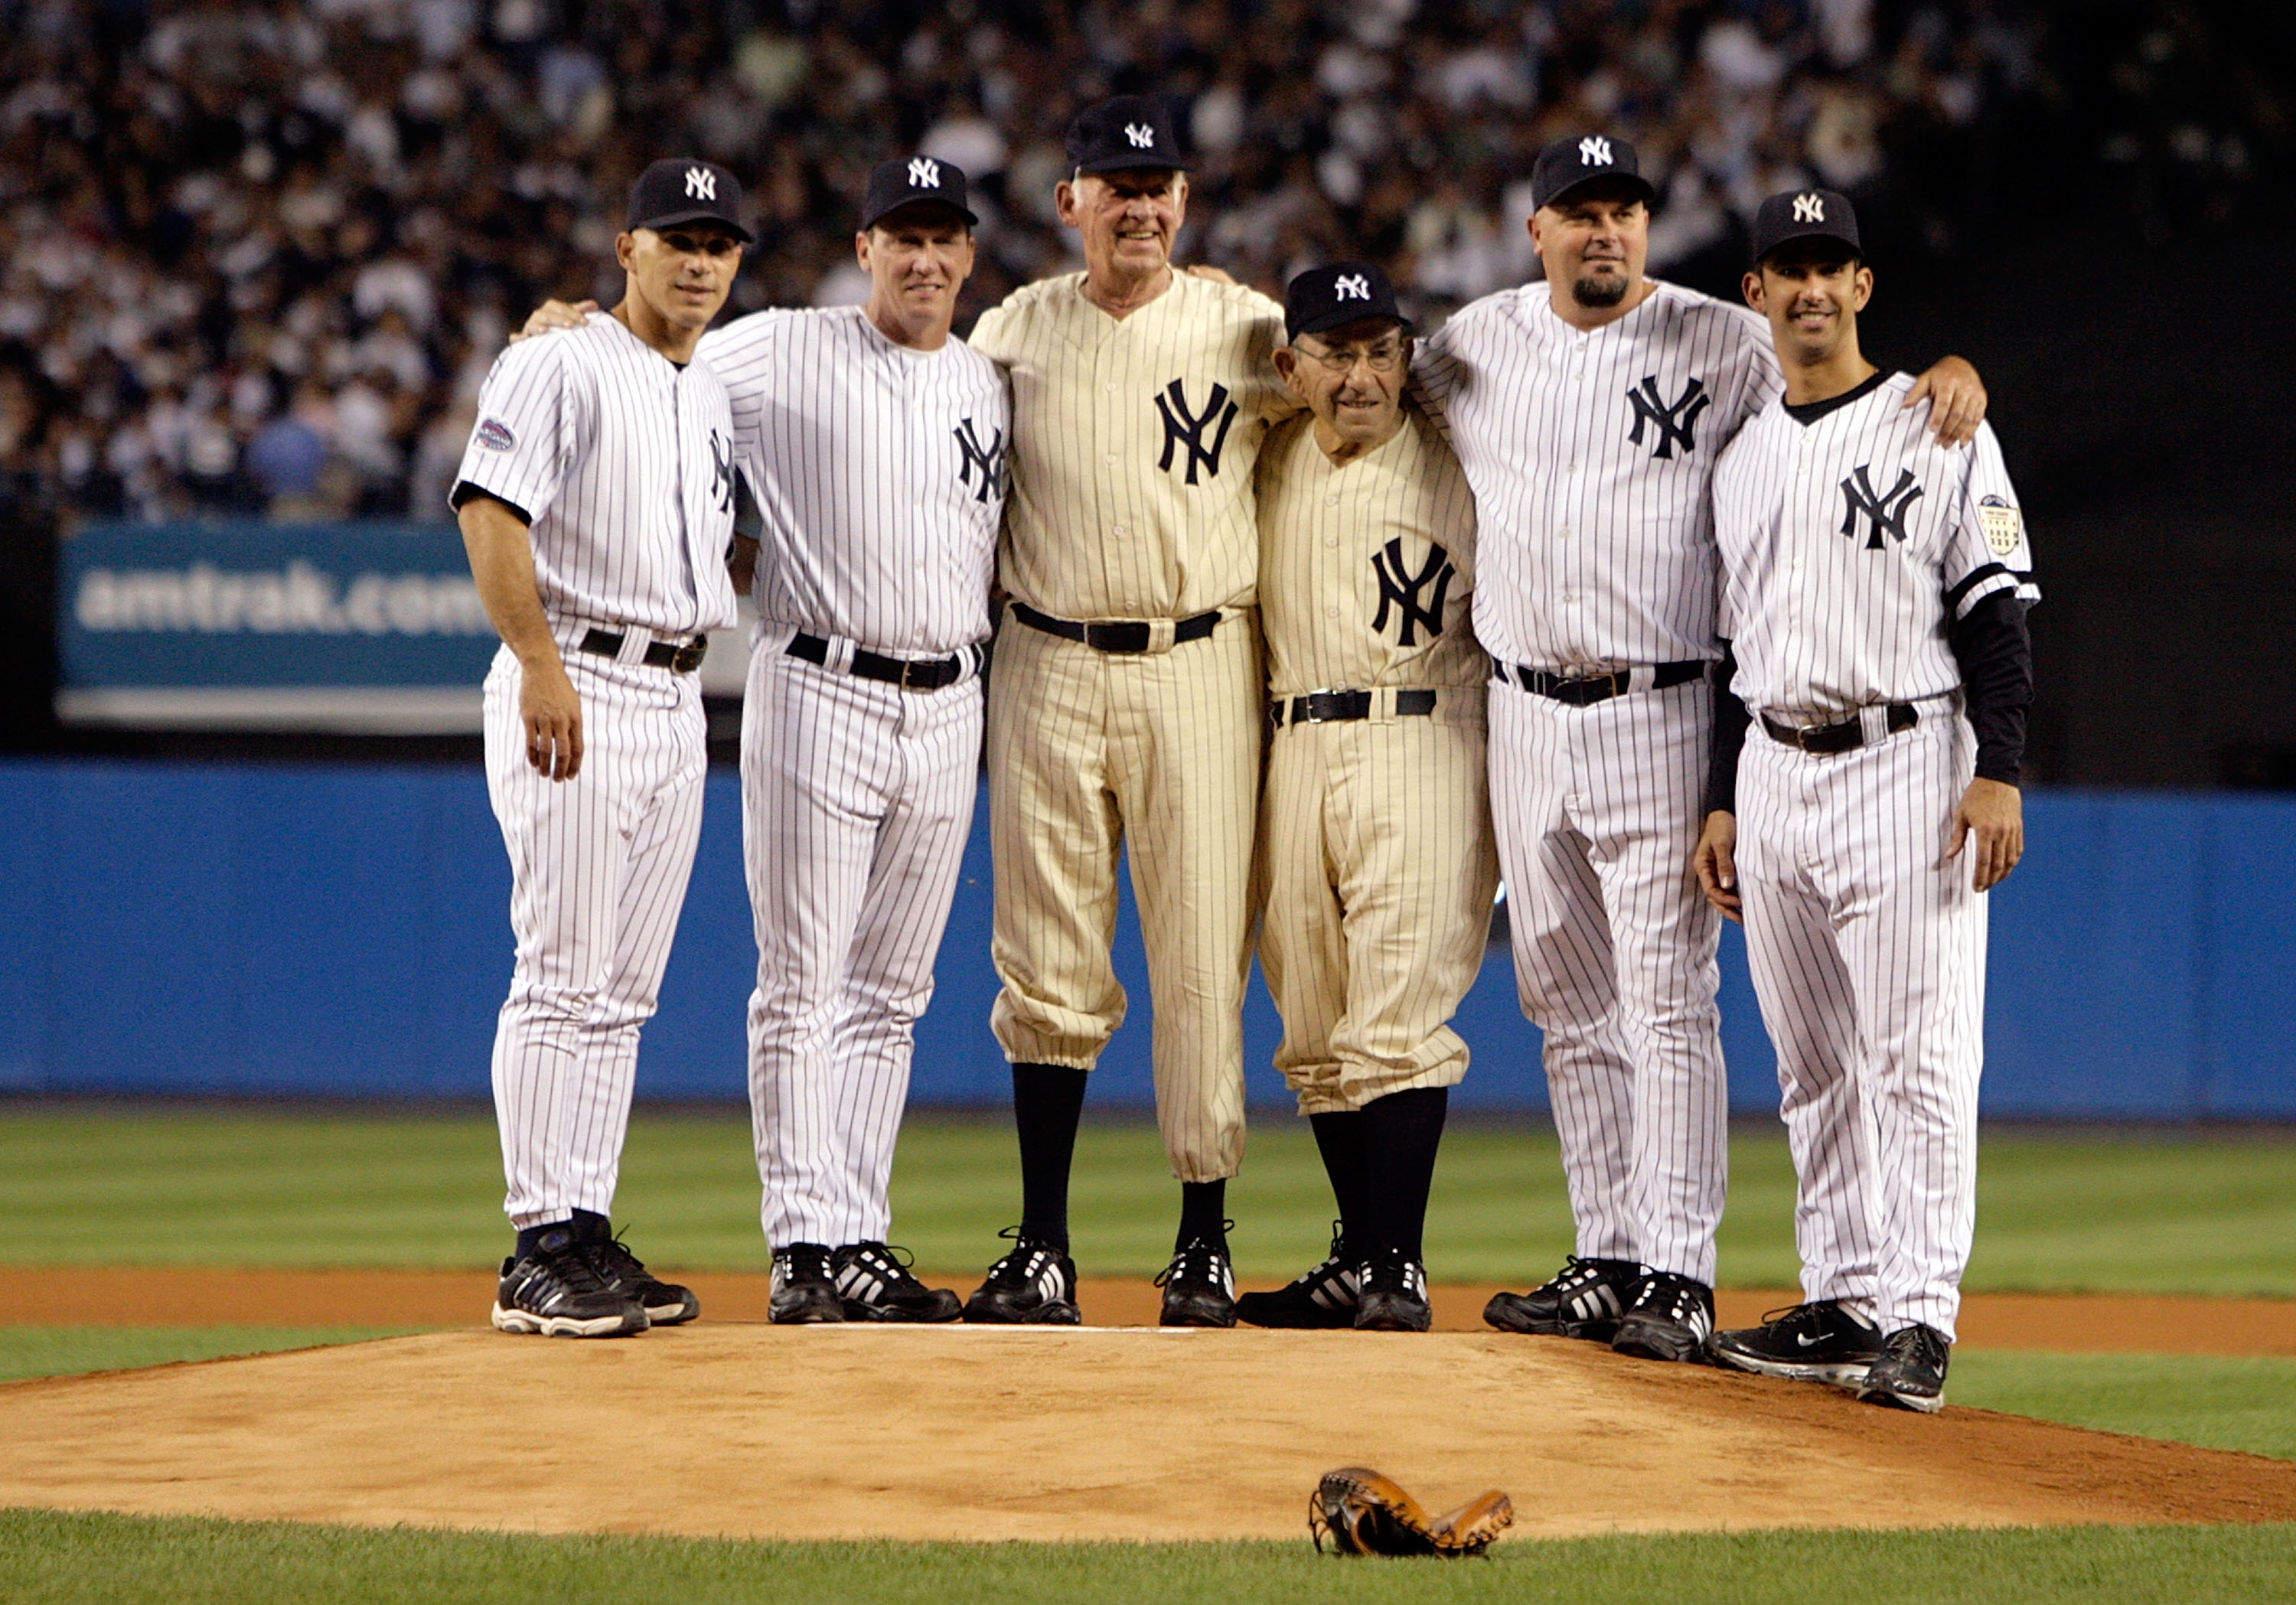 Don Larsen was an unlikely Yankees legend